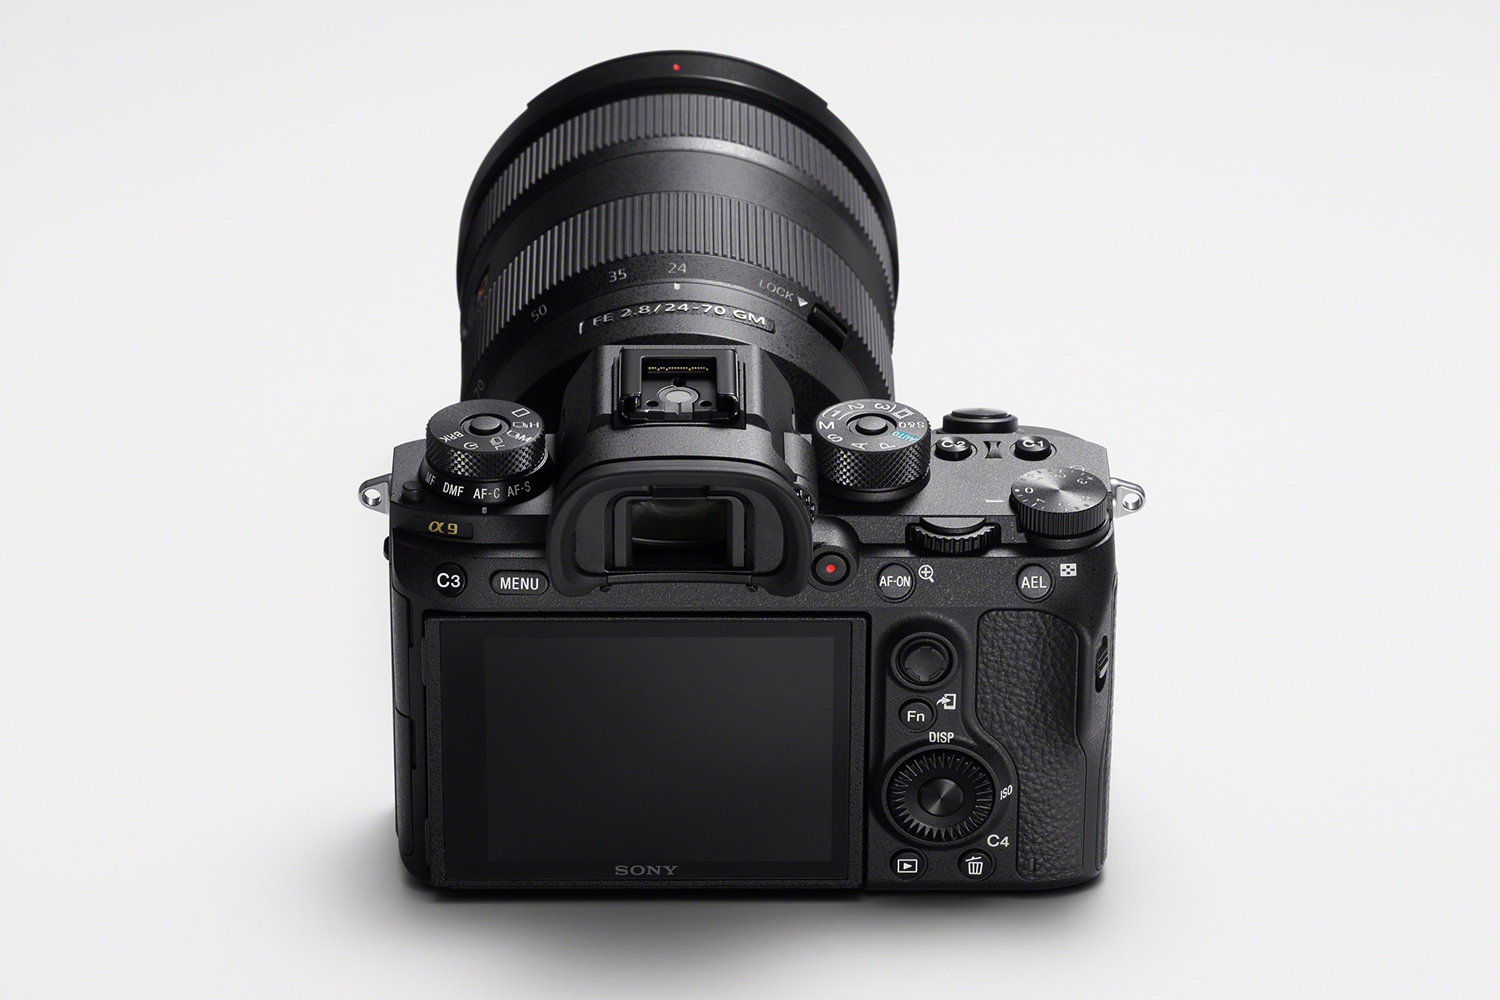 sony a9 full frame camera announced ilce 9 fe70200gm control panel image large